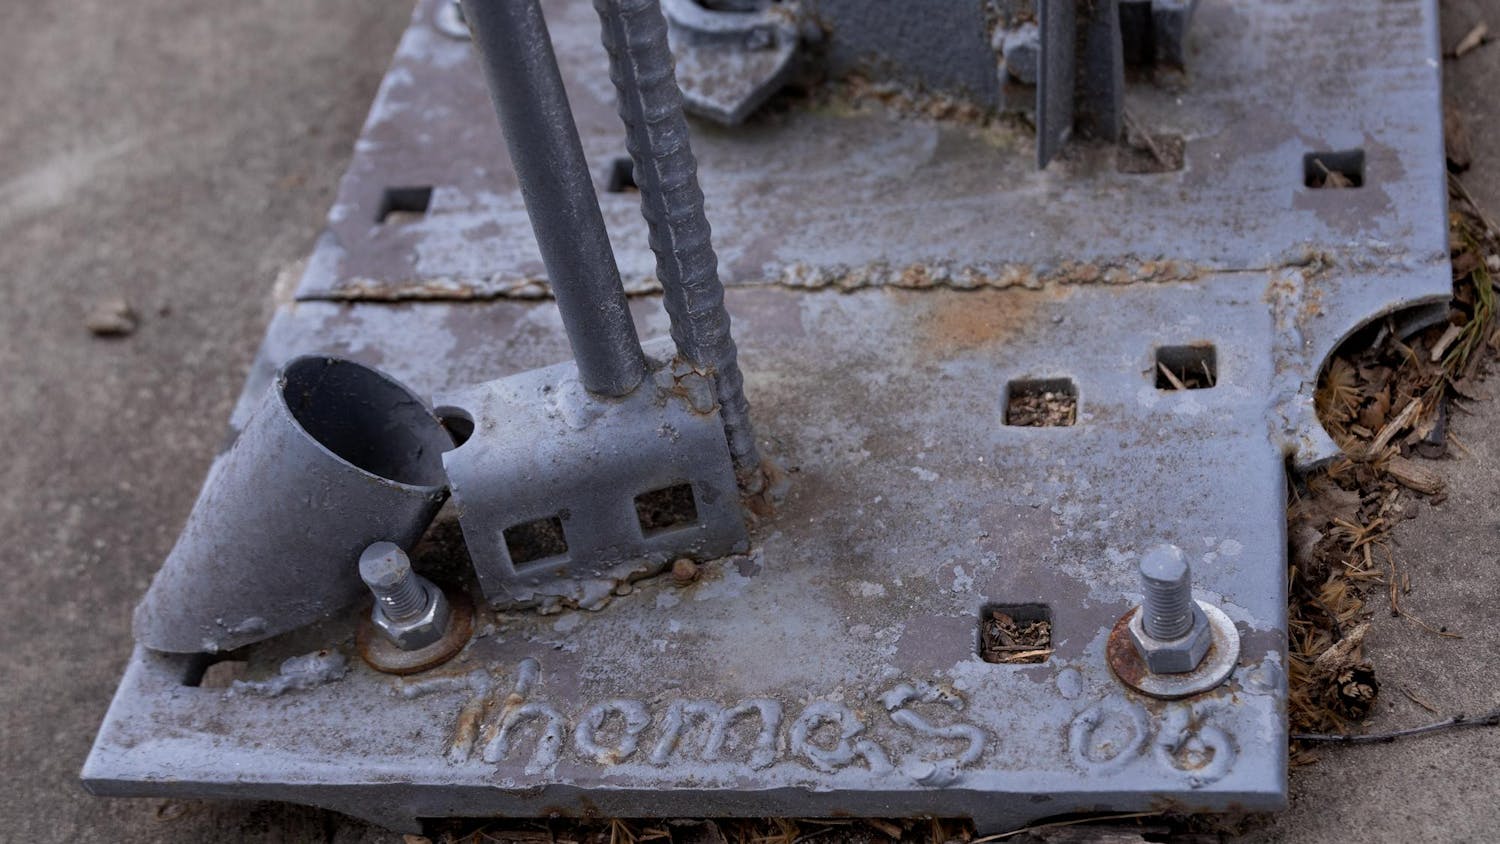 An engraving reading "Thomas '06" is visible on the base of a singer sculpture at the West Columbia Riverwalk. Humphries engraved the work with the year it was made to remember when and why the piece was created.